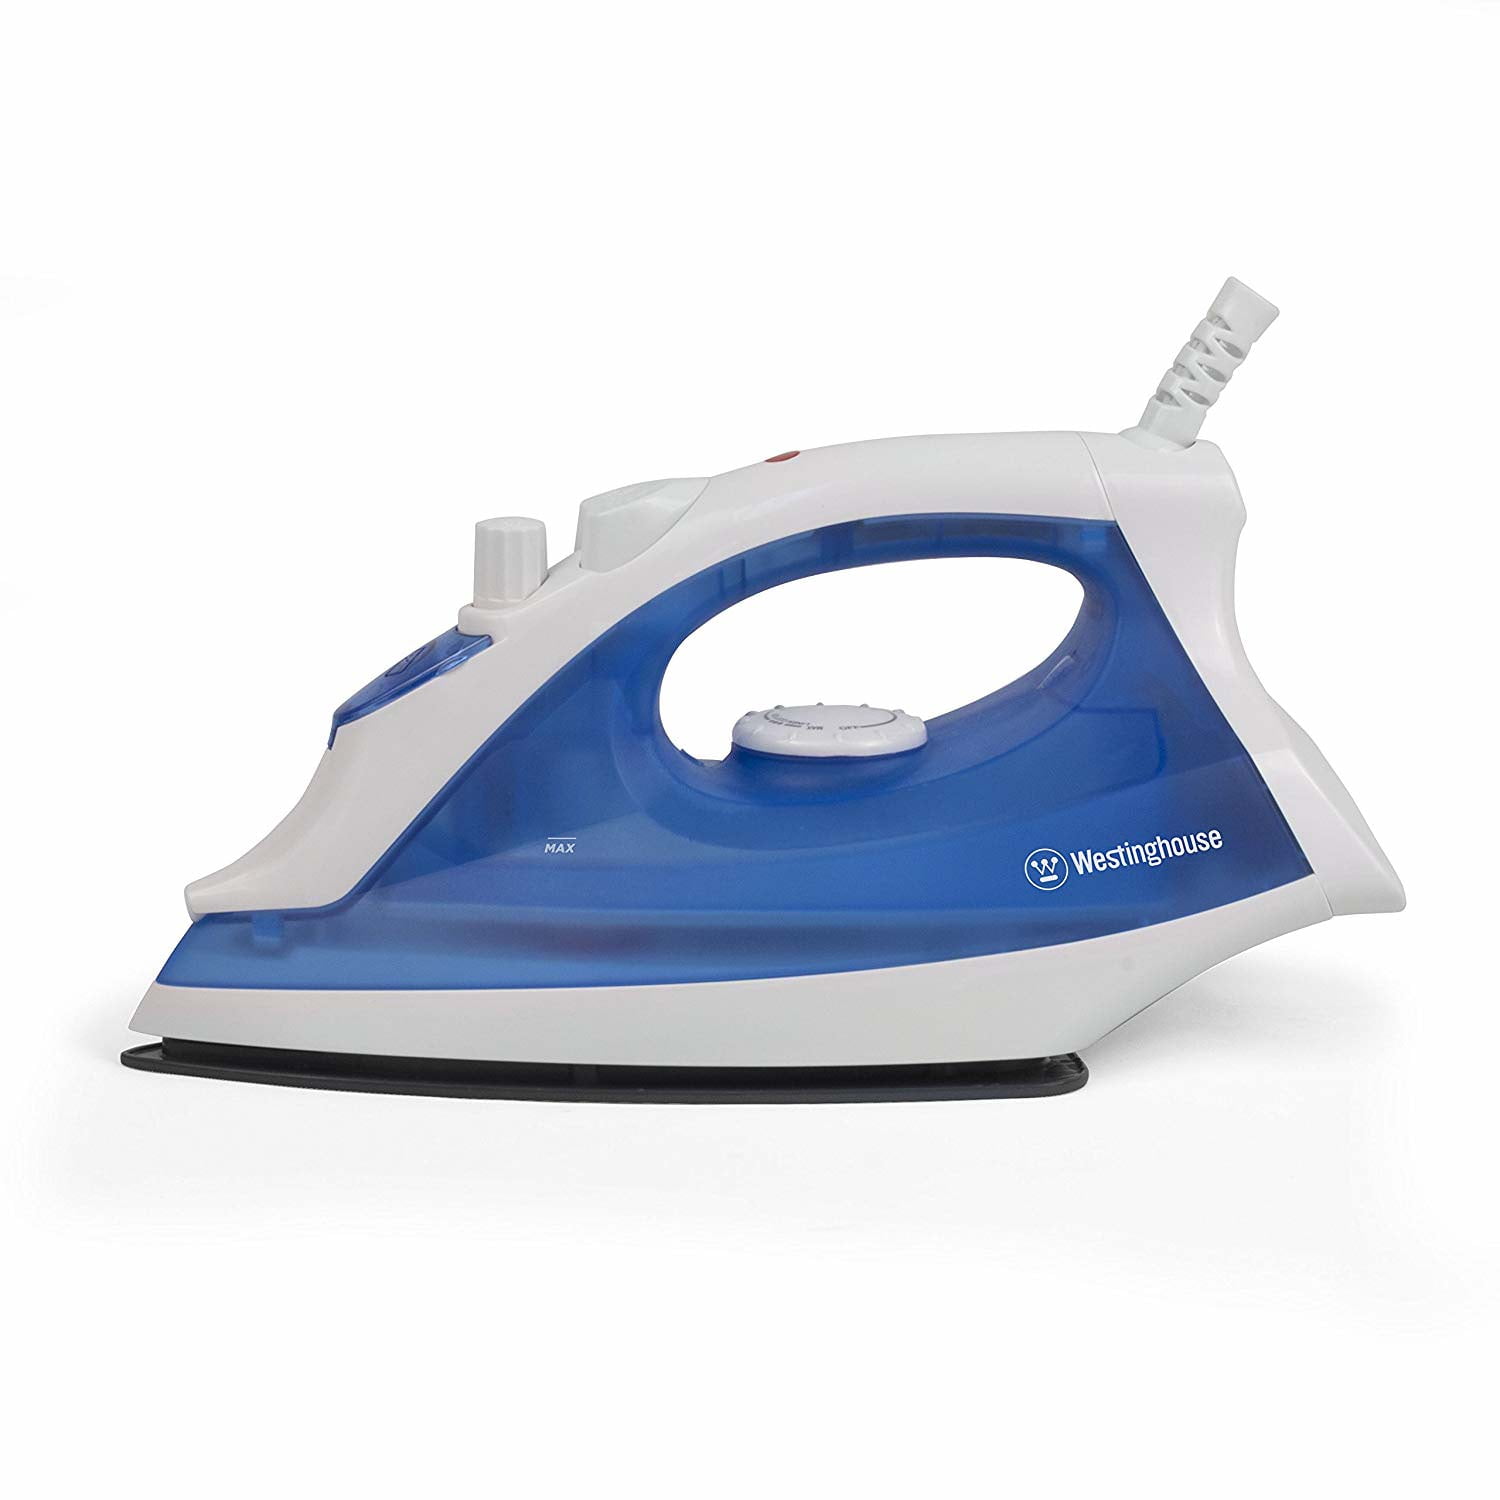 Professional Iron with Auto Shut-Off Non-Stick Ceramic Soleplate Steam Press Iron Westinghouse Clothing Steam Iron with LCD Display